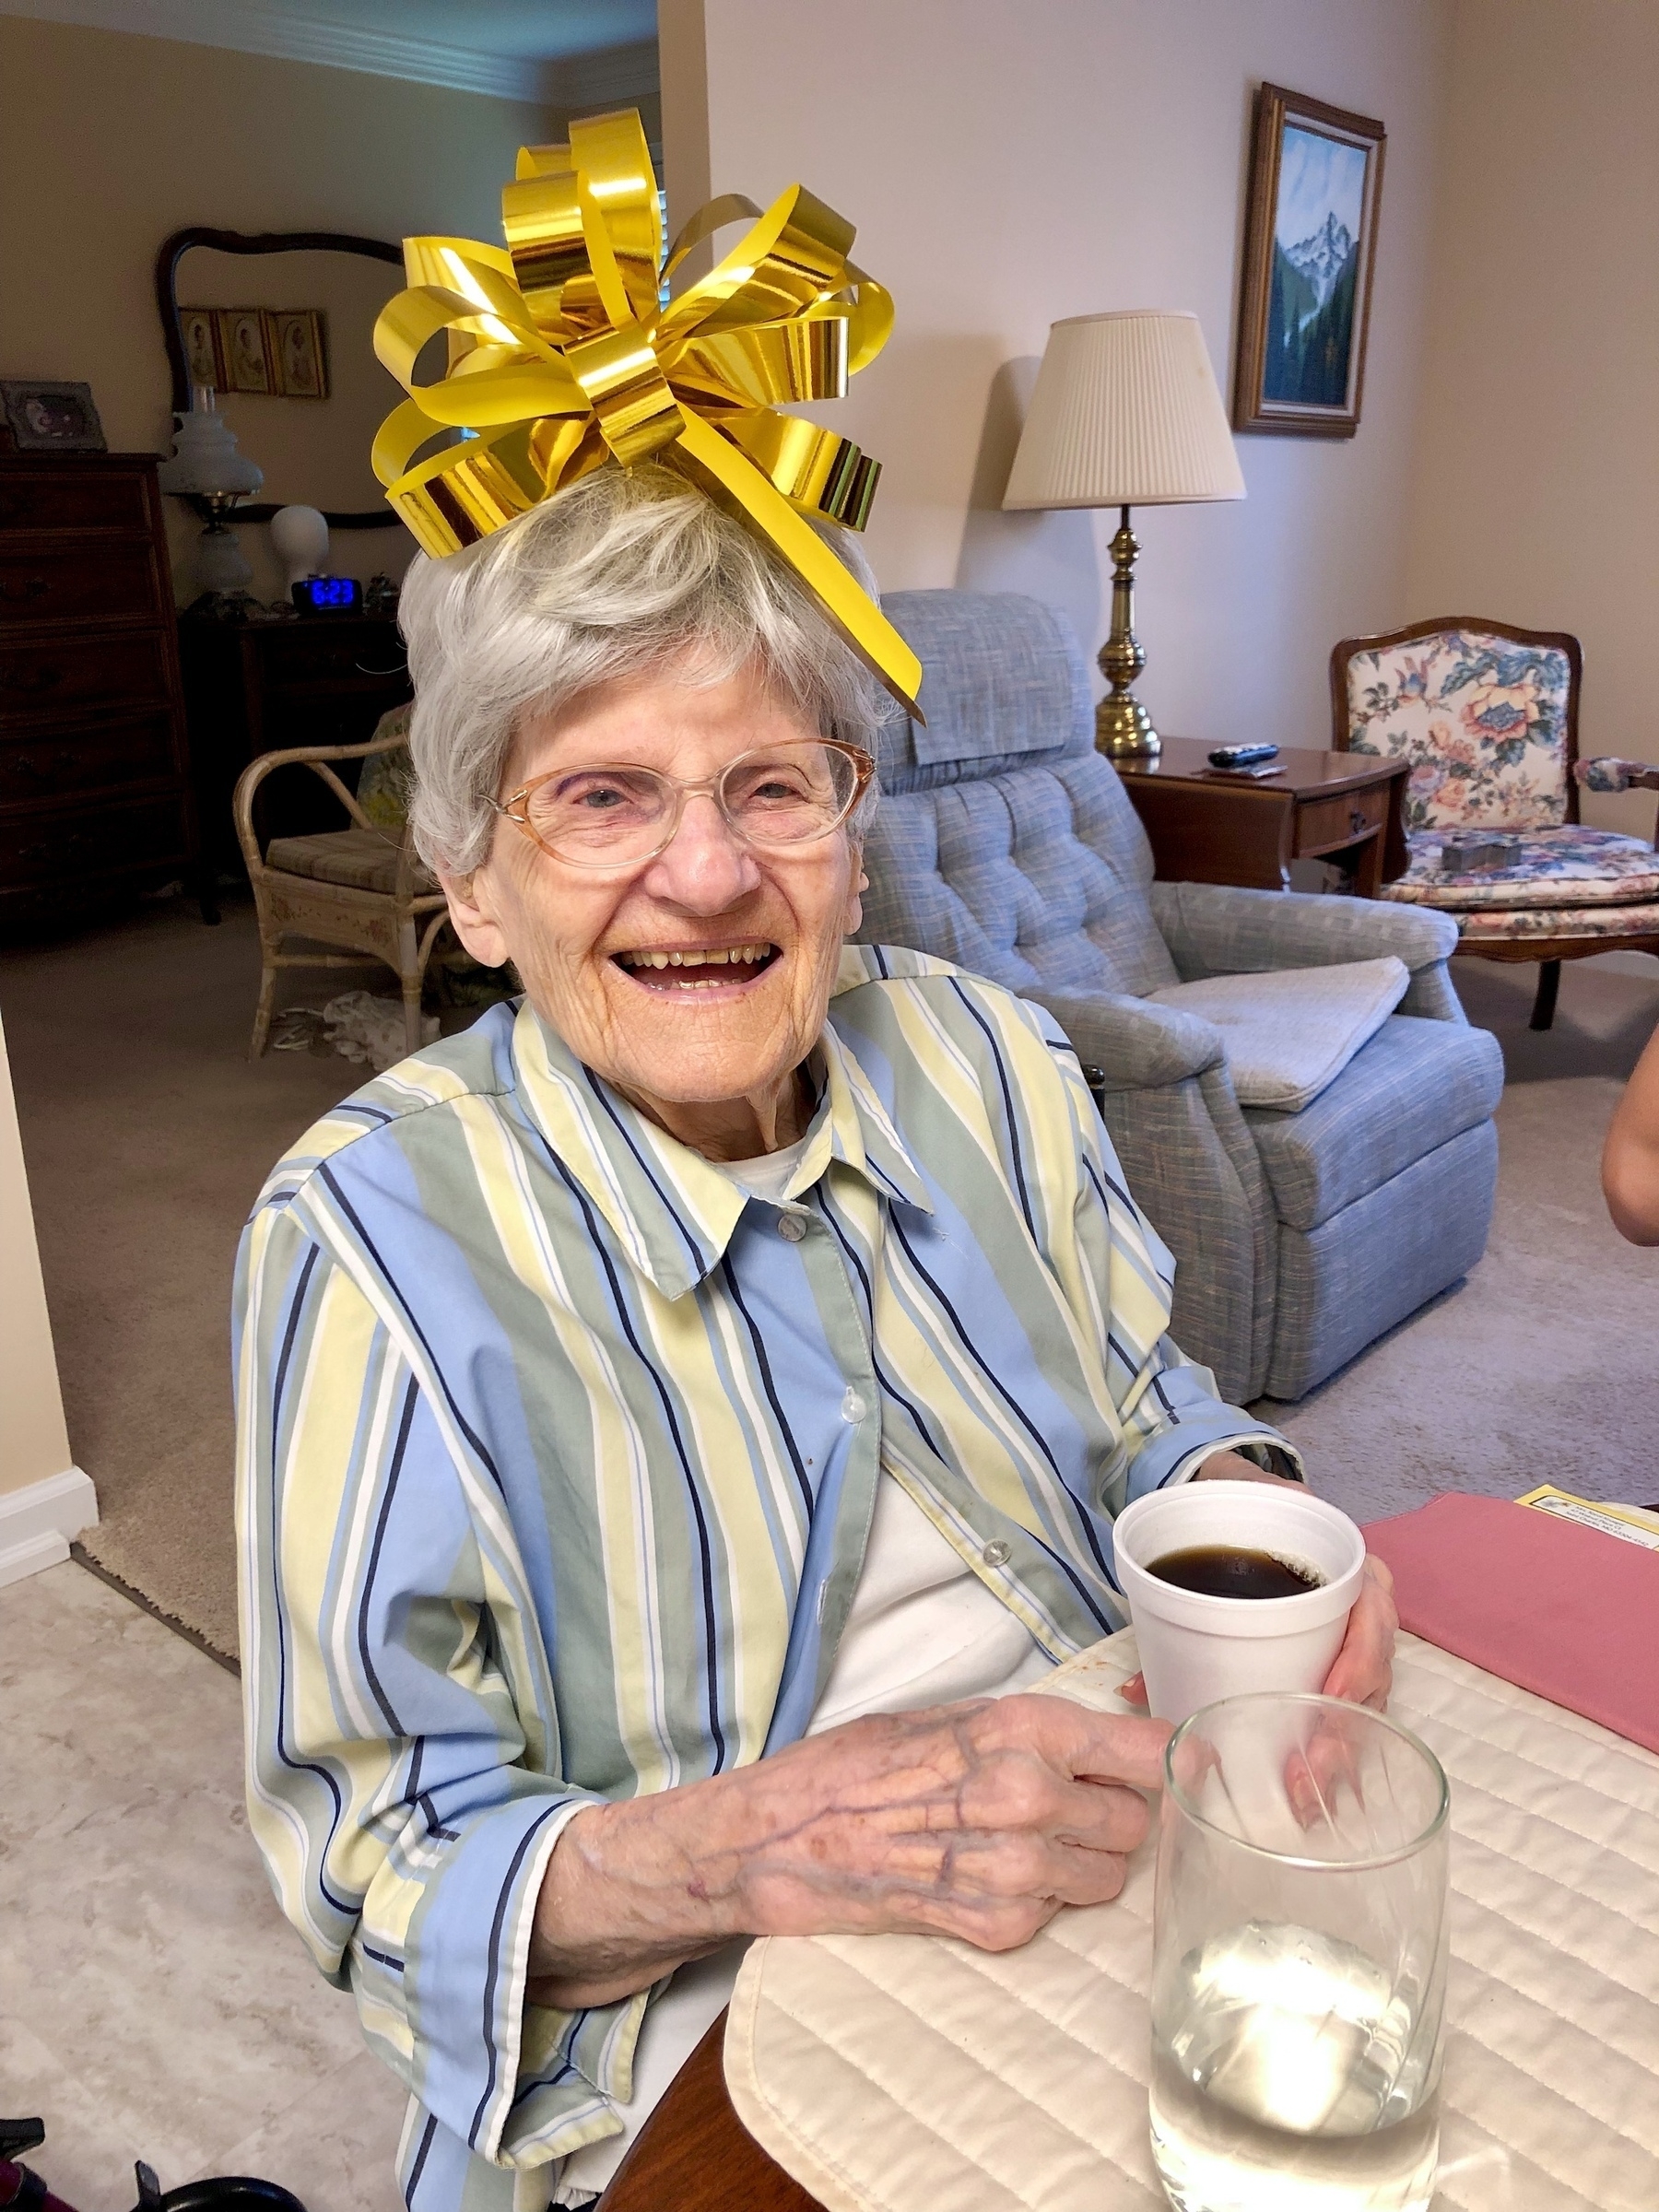 Little old Lady (don't worry, she'd have laughed at that joke) with glasses in a striped shirt (blue, yellow, and green), sitting in a chair at the kitchen table with a cup of coffee in her hand and a giant bow on her head, with a gigantic smile on her face.